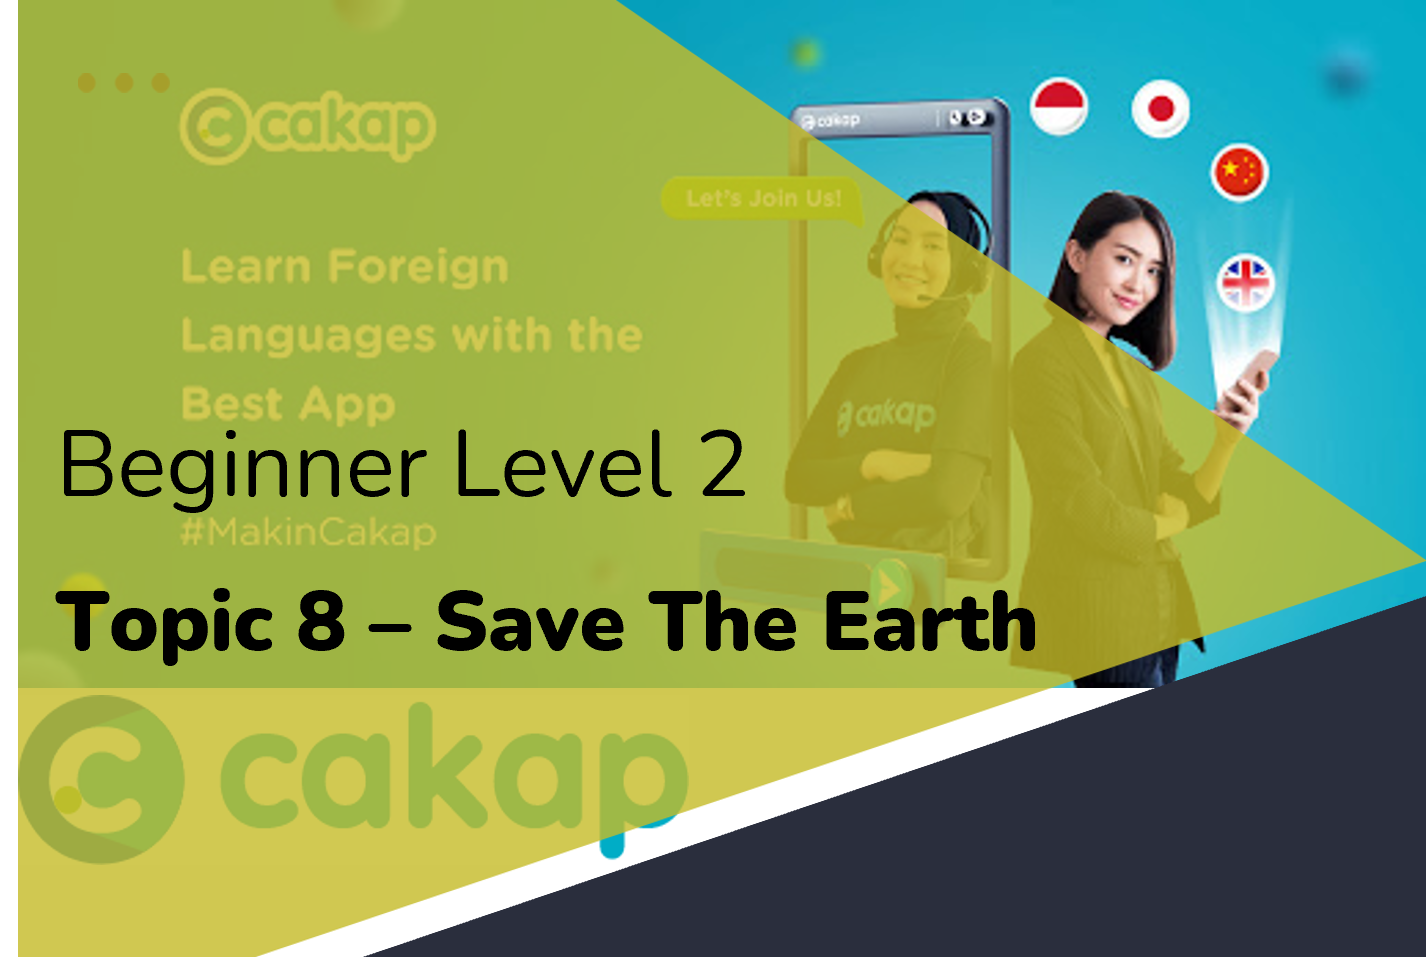 Beginner 2: Topic 8 - Save The Earth